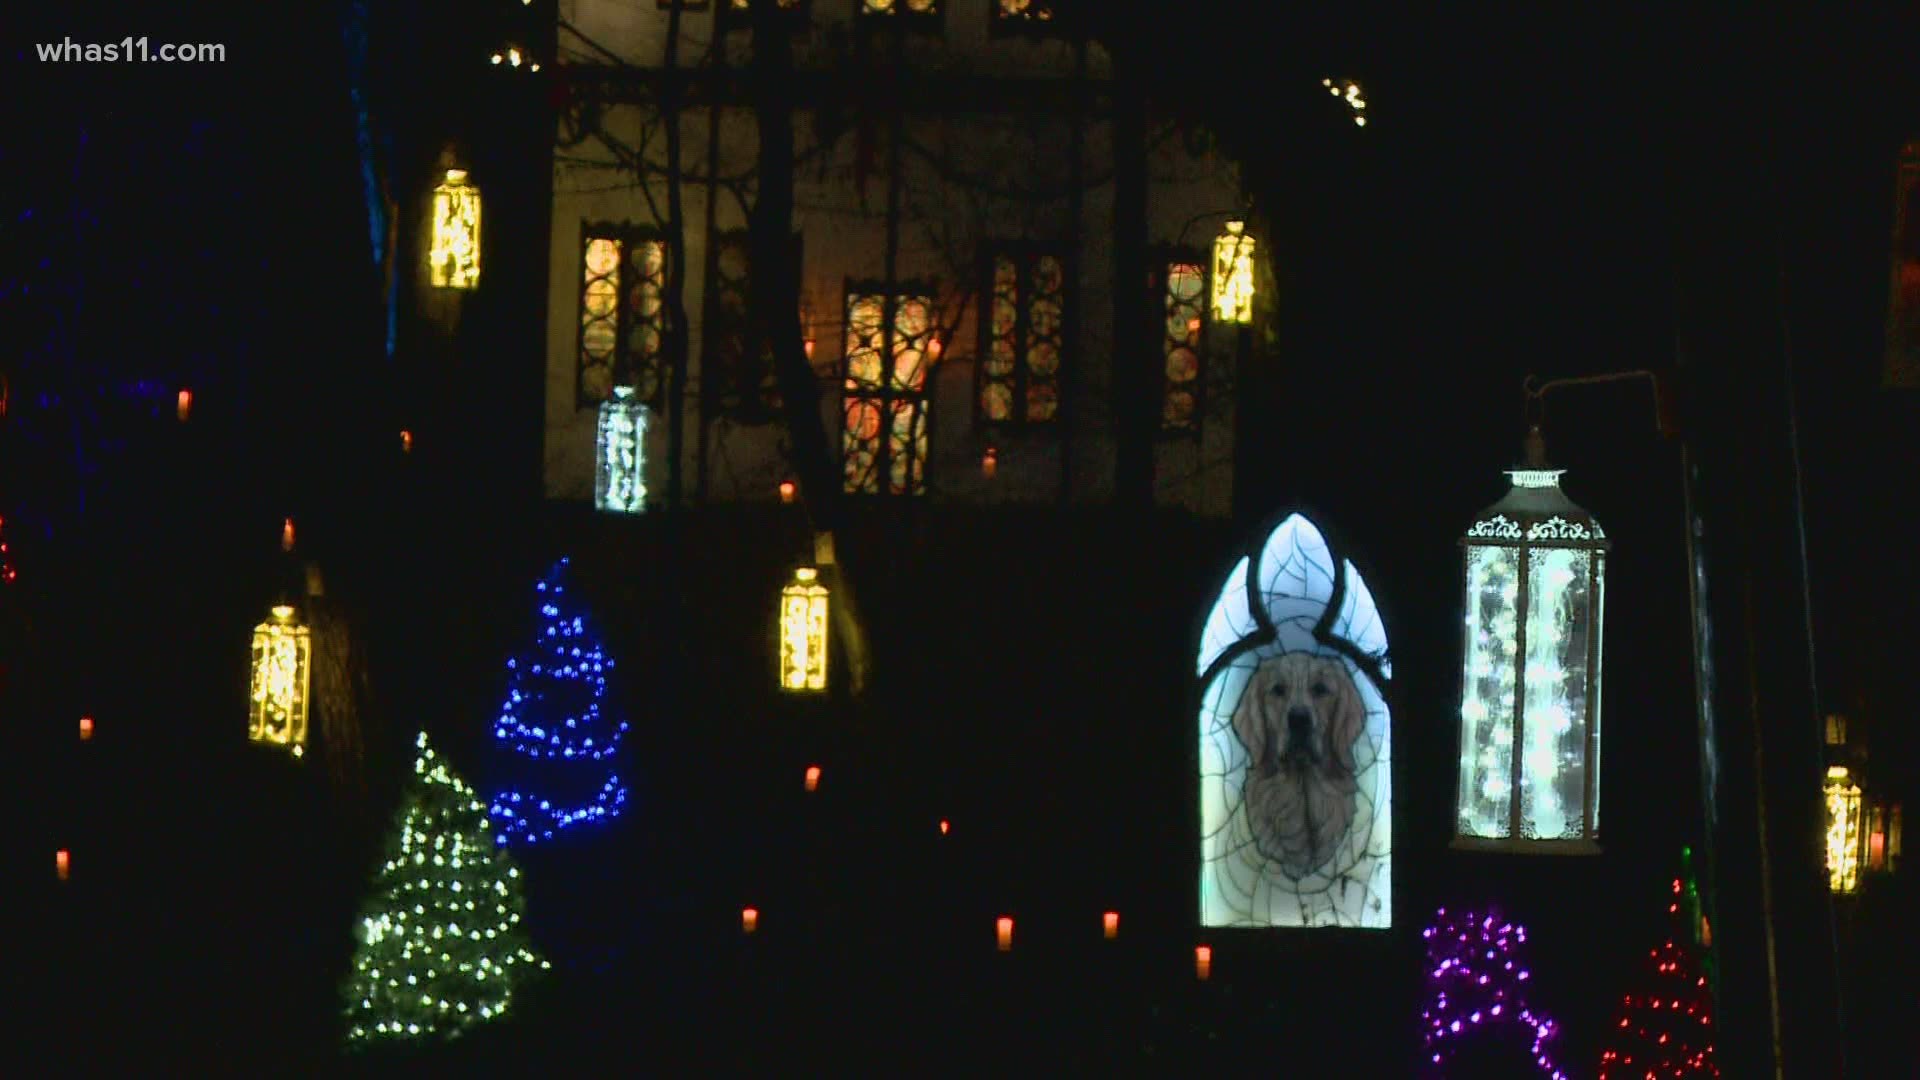 There are some pretty spectacular holiday displays around Louisville and southern Indiana this year.